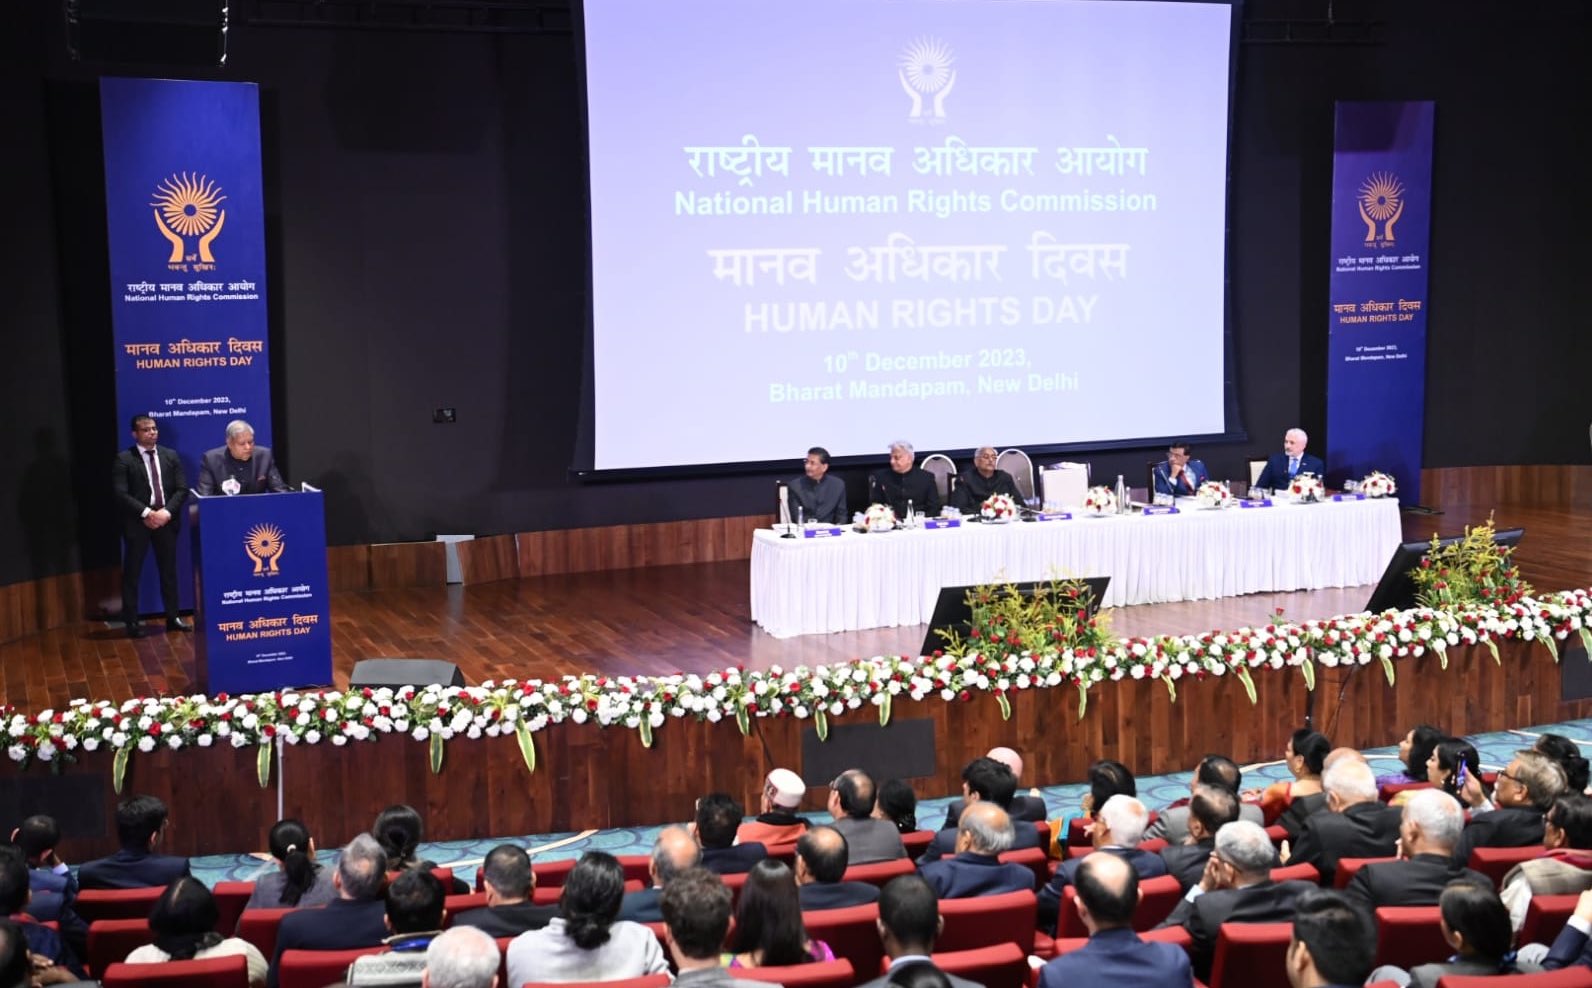 The Vice-President, Shri Jagdeep Dhankhar addressing the gathering during the Human Rights Day celebrations organised by National Human Rights Commission at Bharat Mandapam in New Delhi on December 10, 2023.